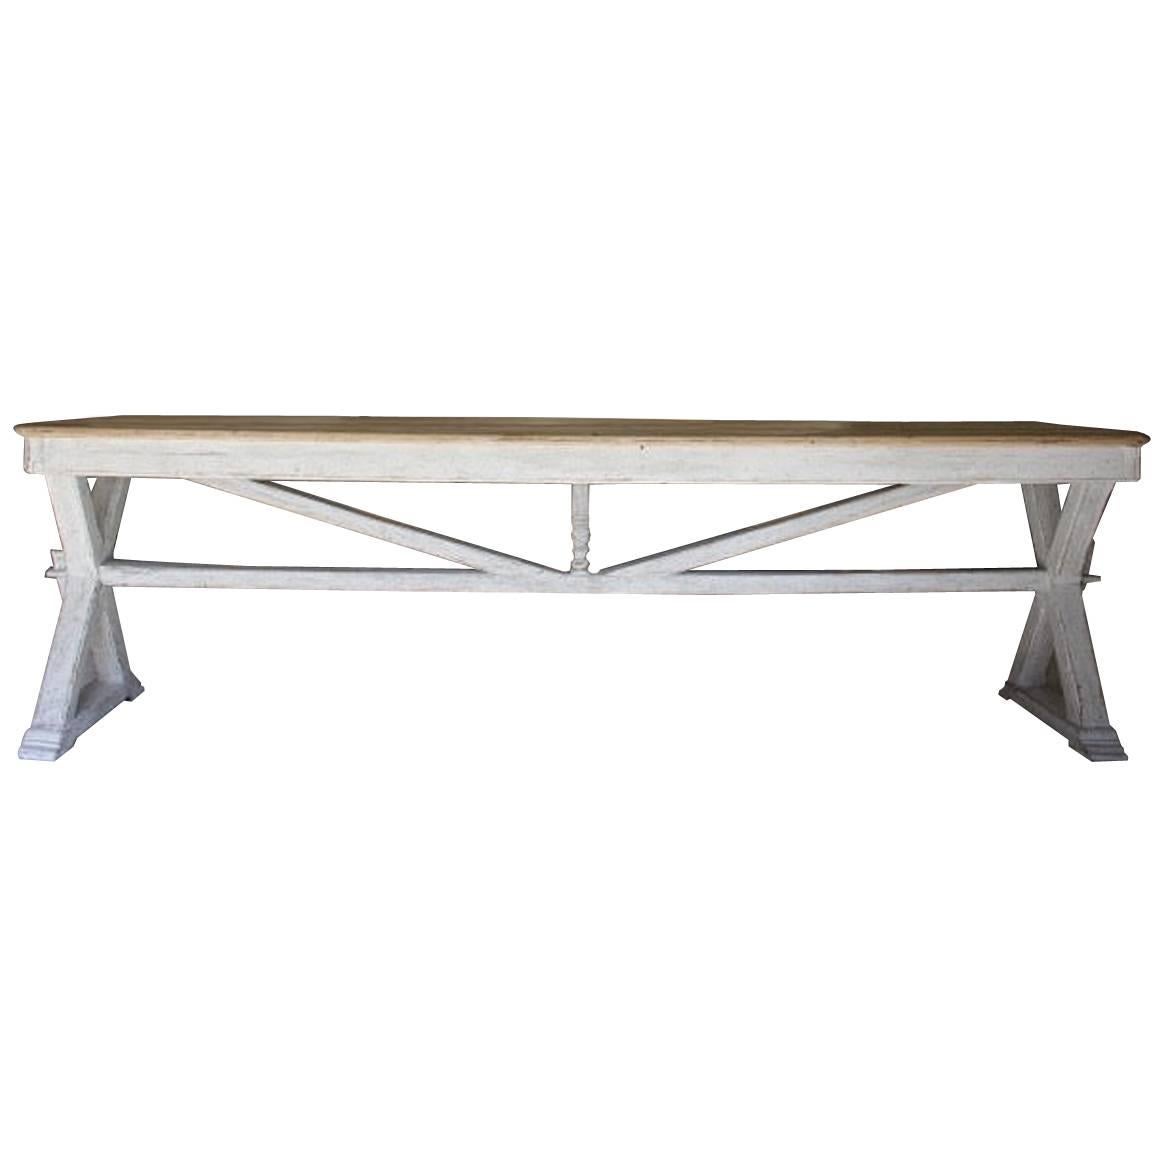 A stunning French stretcher dining table or console table with a unique 